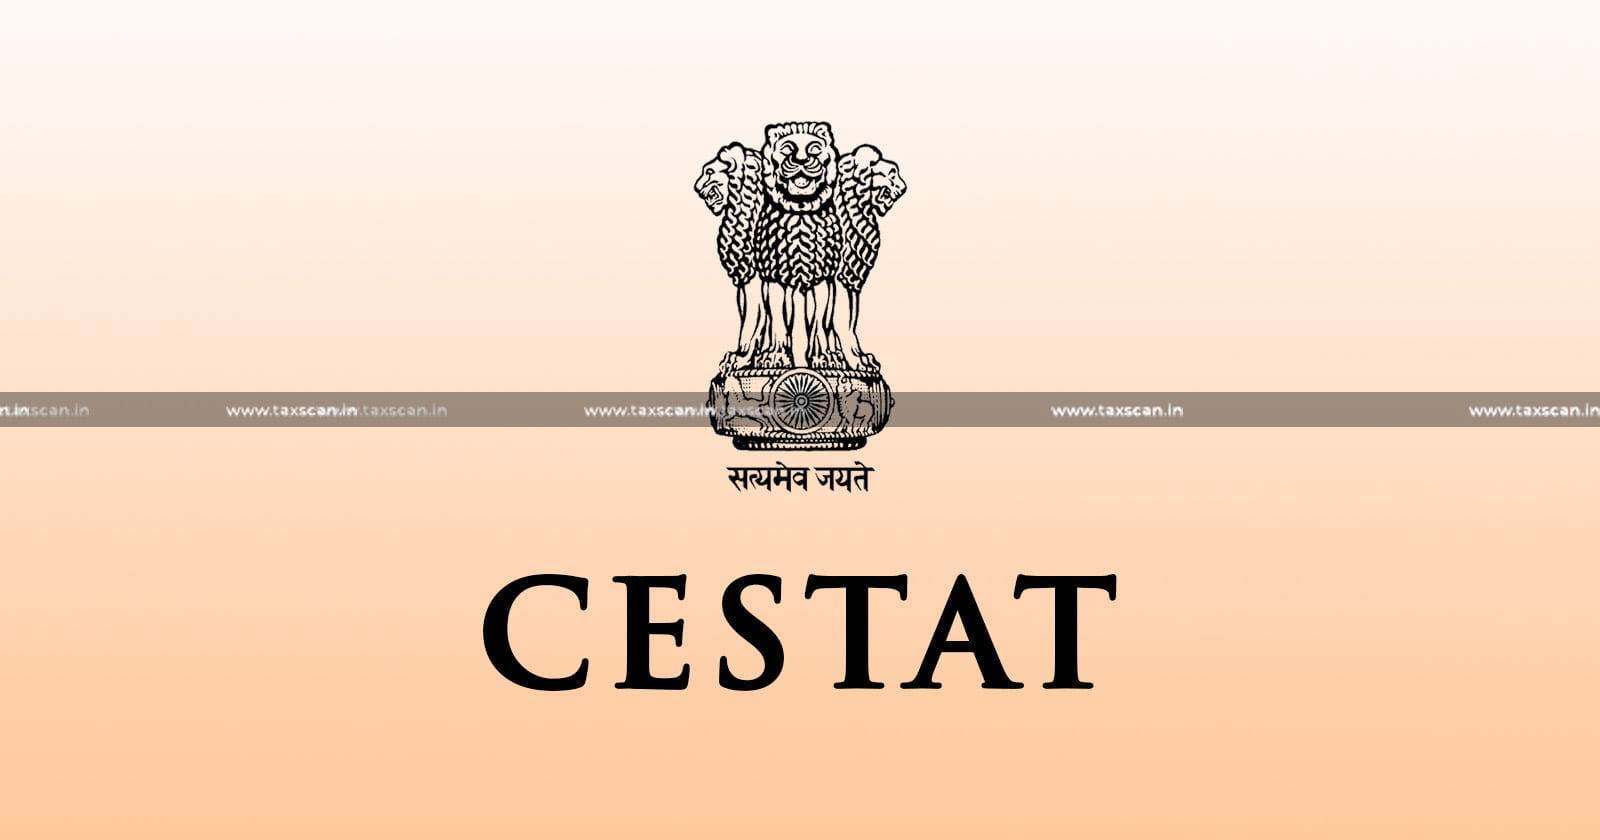 Cenvat Utilization by Any Unit of Same Entity would not Make Any Loss to Exchequer - Cenvat Utilization - Loss to Exchequer - Loss - CESTAT - Taxscan